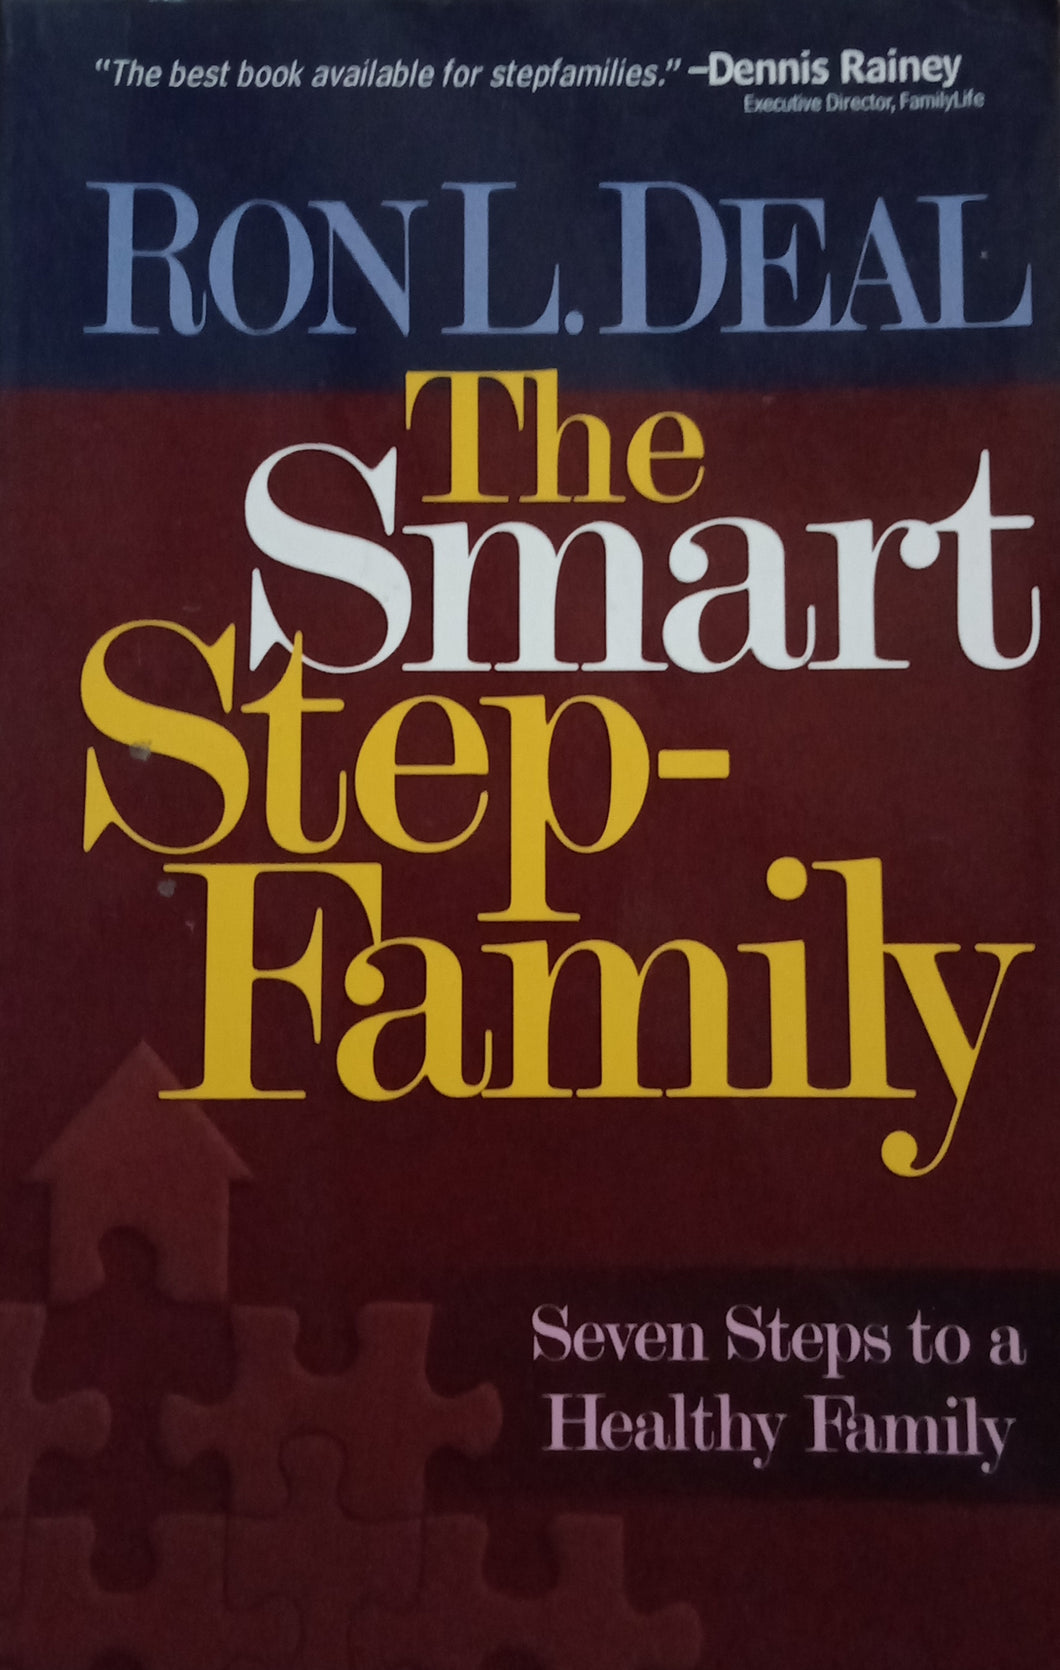 The Smart Step-Family by Ron Deal